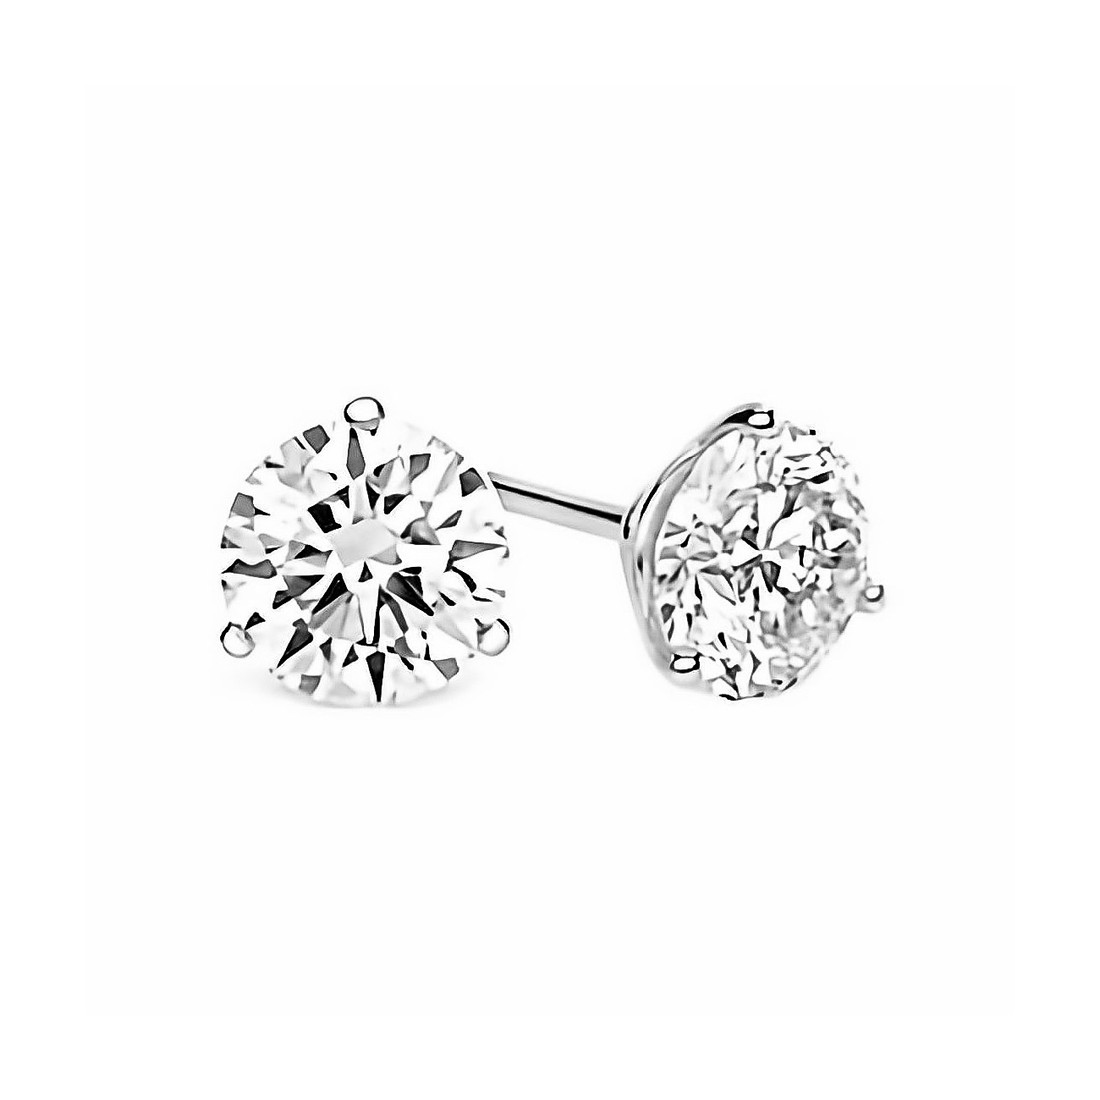 Round Brilliant Cut Diamond 3Prong Martini Studs 14k White Gold  Earrings  Jewelry Collections